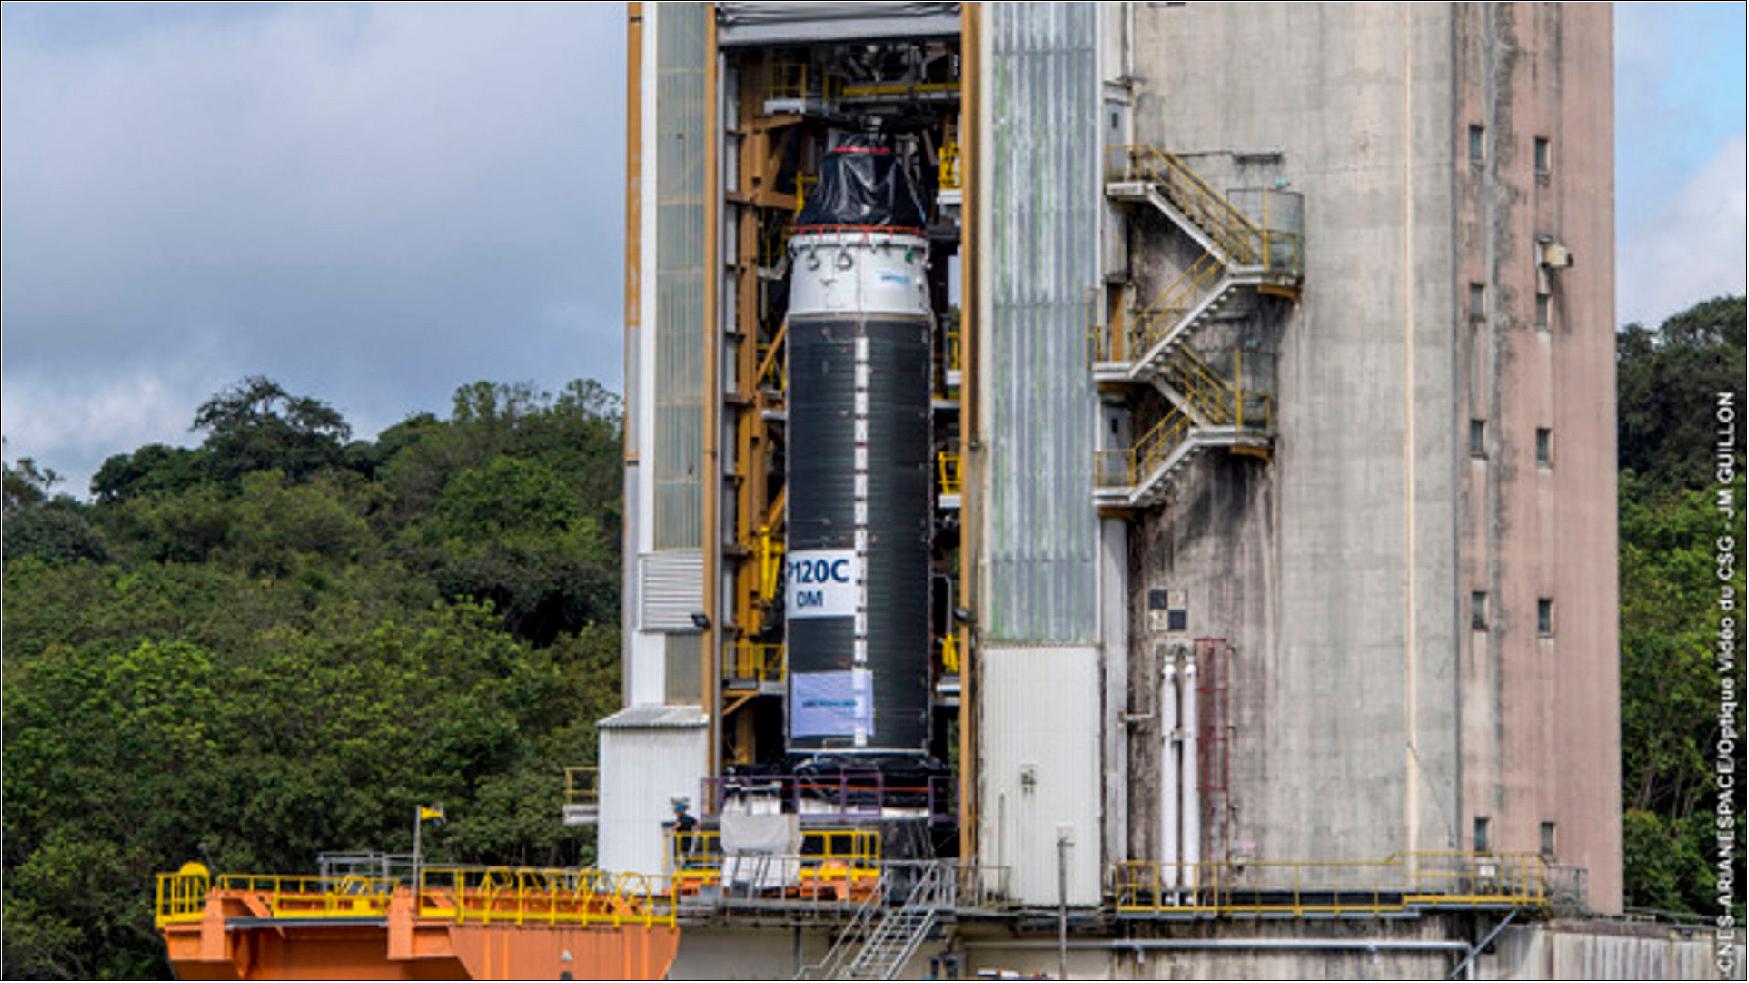 Figure 110: Largest-ever solid rocket motor poised for first hot firing (image credit: ESA/CNES/Arianespace)